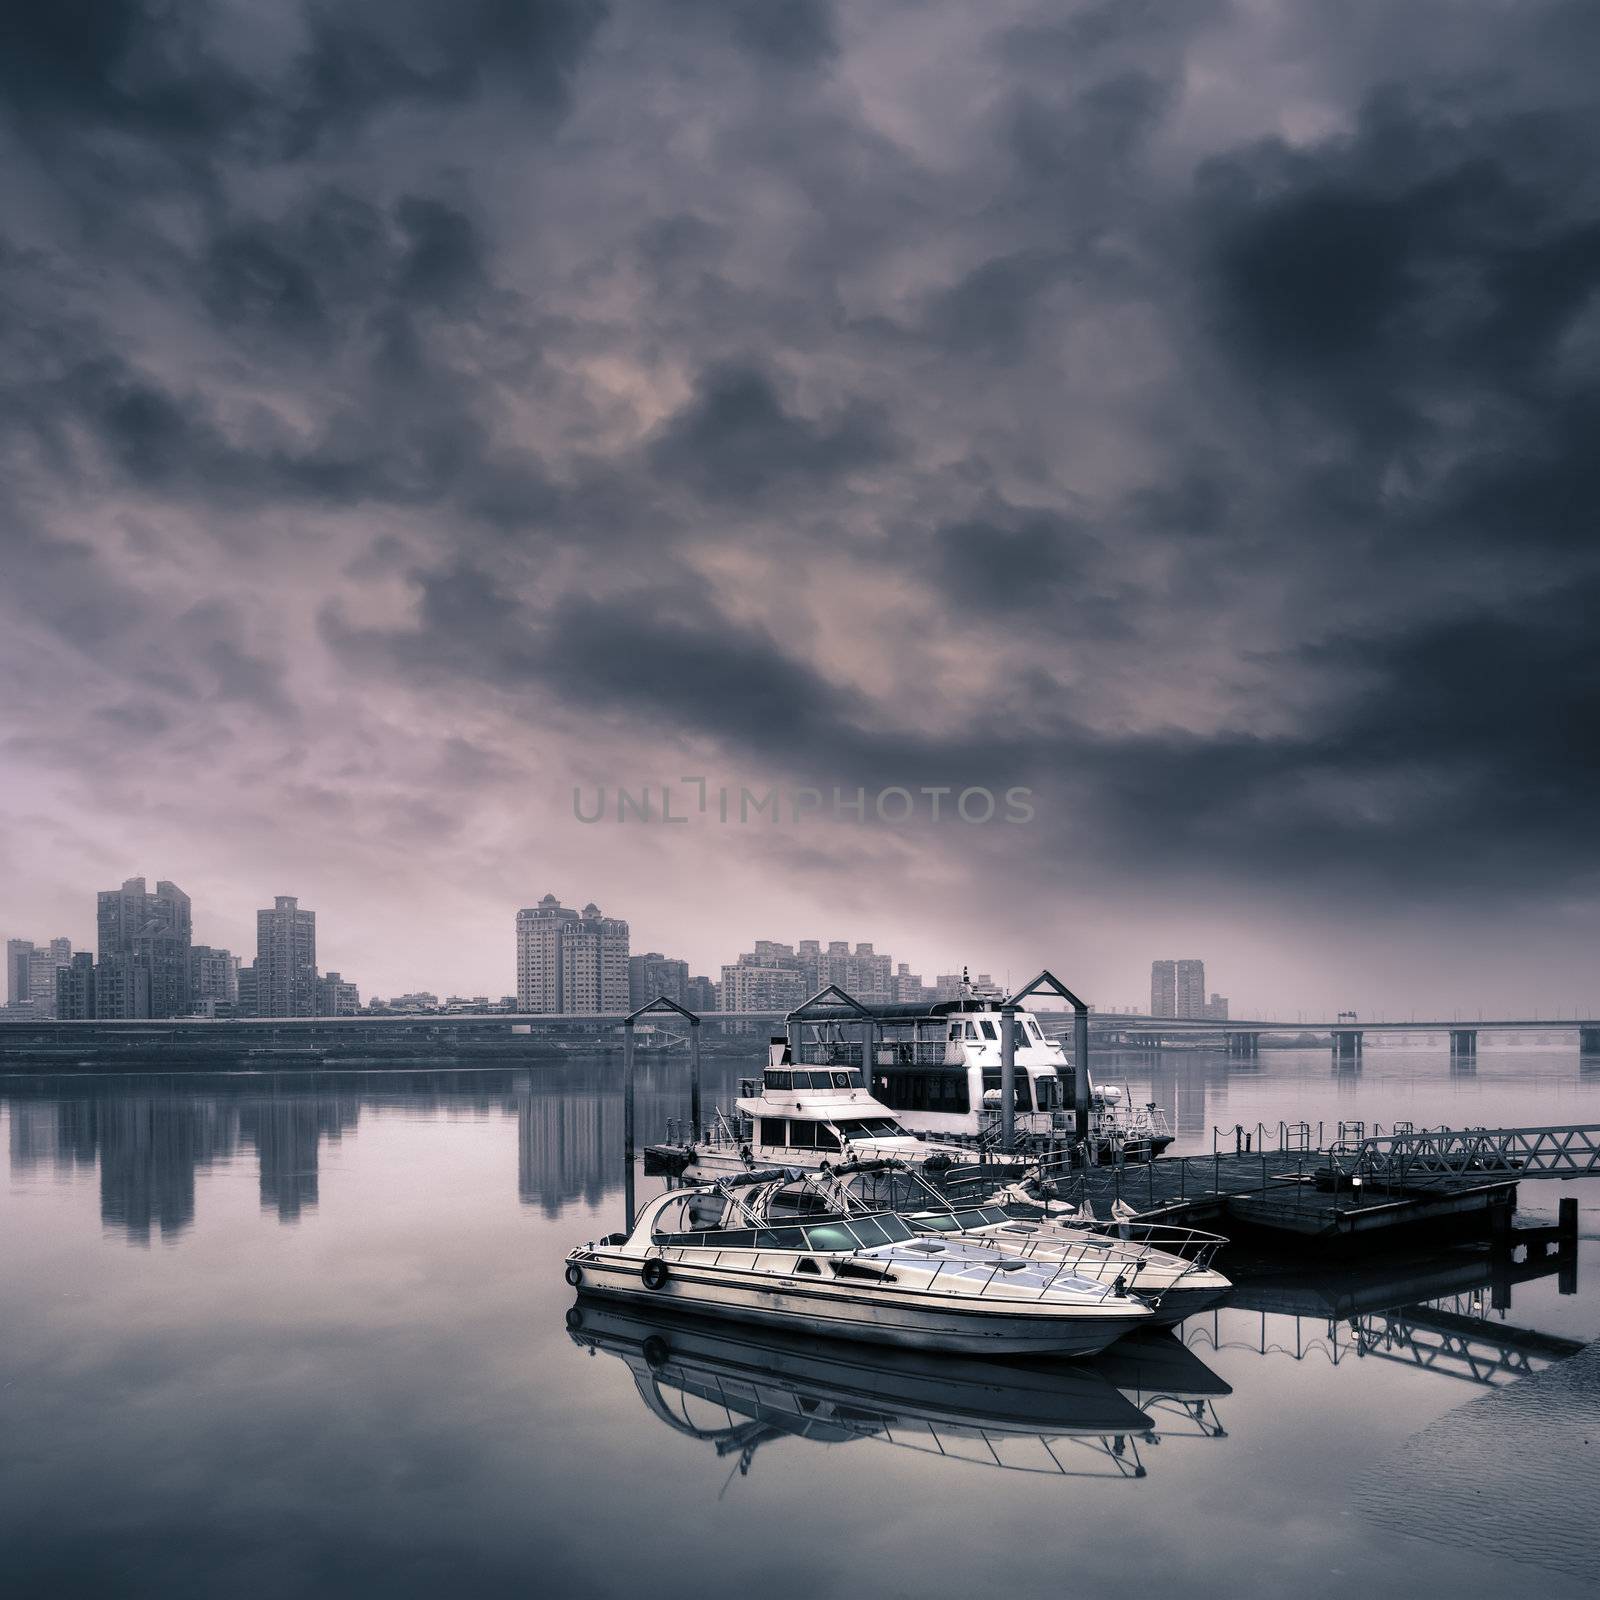 Cityscape of harbor with boat on water against dramatic sky.